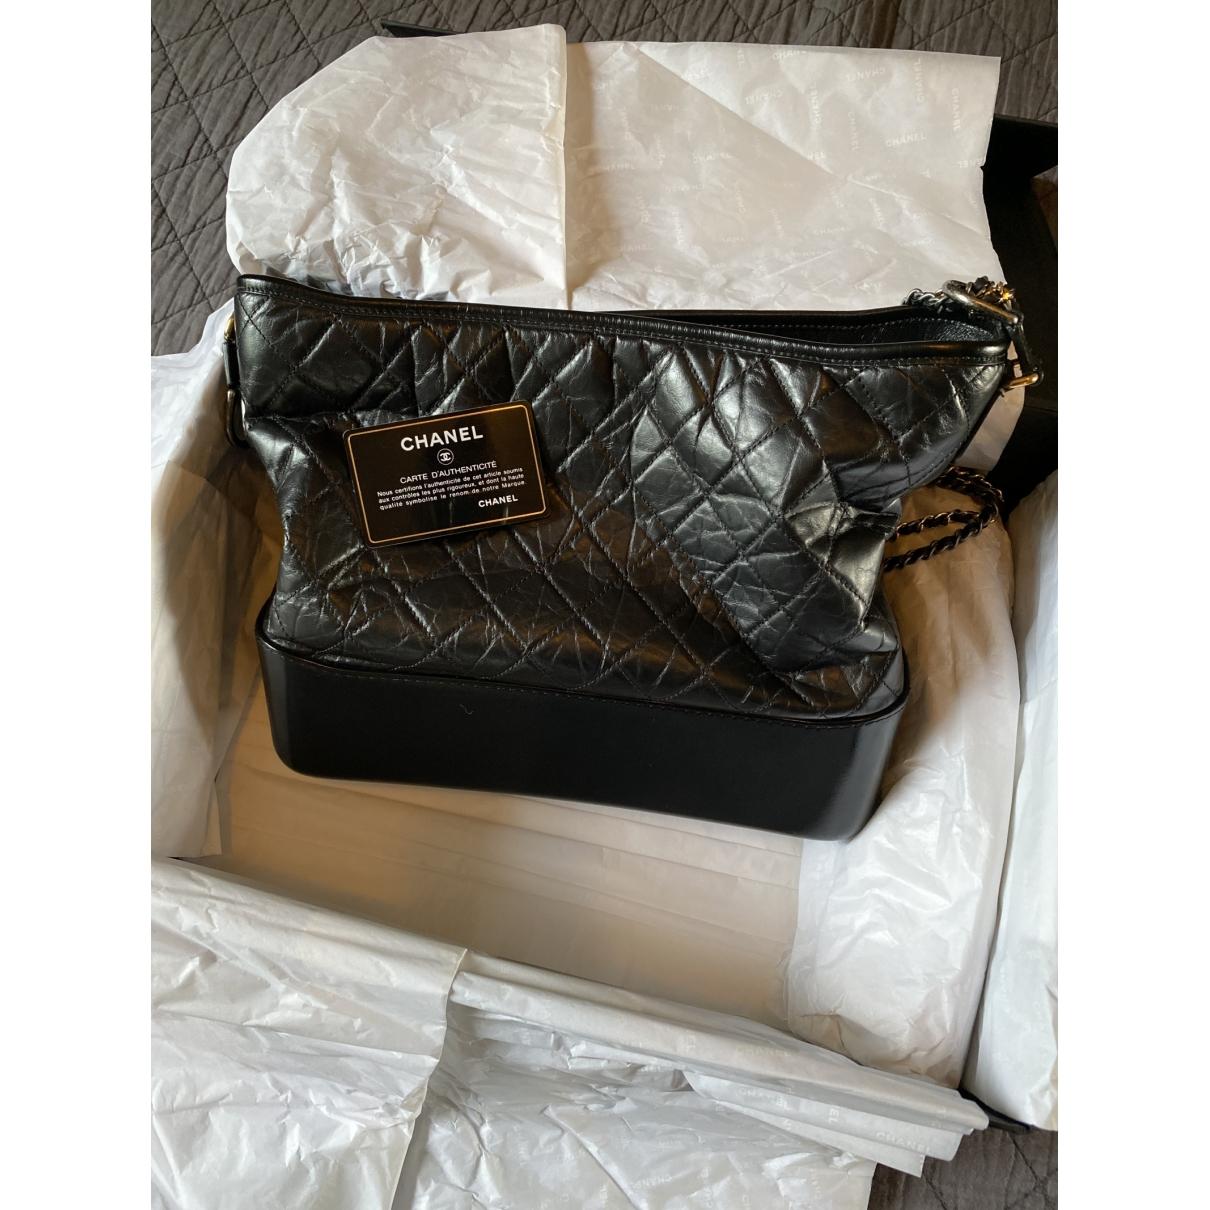 Chanel Gabrielle leather crossbody bag for sale